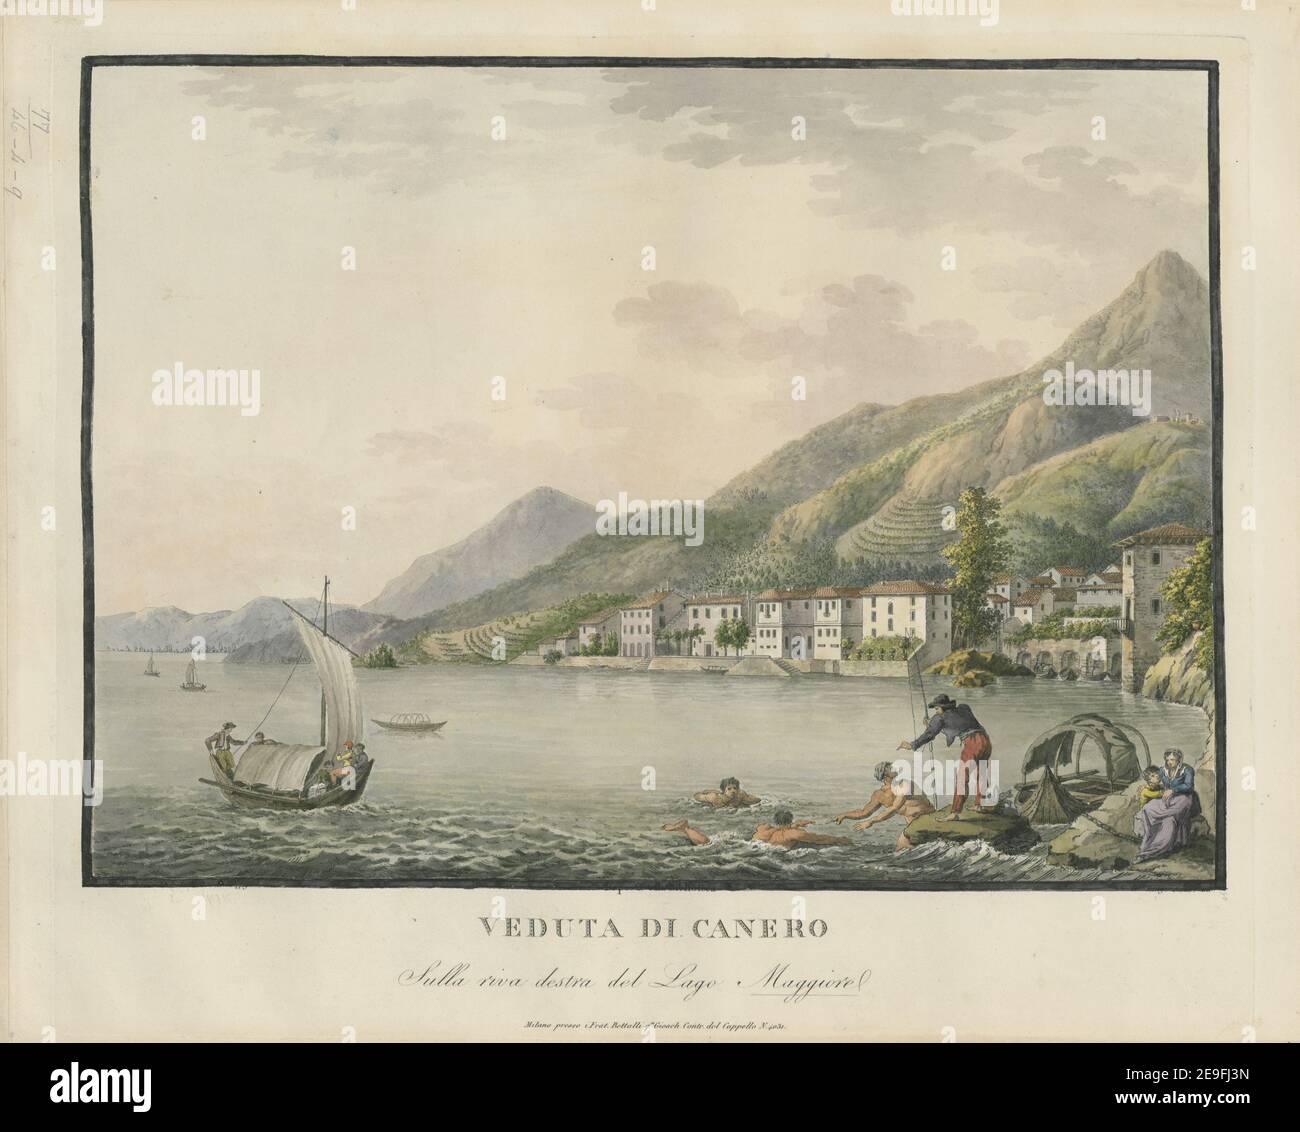 VEDUTA DI CANERO Sulla riva destra del Lago Maggiore. Author  Rados, Luigi 77.46.4.g. Place of publication: Milan Publisher: presso i Frat. Bettalli q.m Gioach.o Contr. del Cappello N¬∞ 4031, Date of publication: [between 1814 and 1820]  Item type: 1 print Medium: hand-coloured etching Dimensions: platemark 38.6 x 46.2 cm, on sheet 40.4 x 49.9 cm  Former owner: George III, King of Great Britain, 1738-1820 Stock Photo